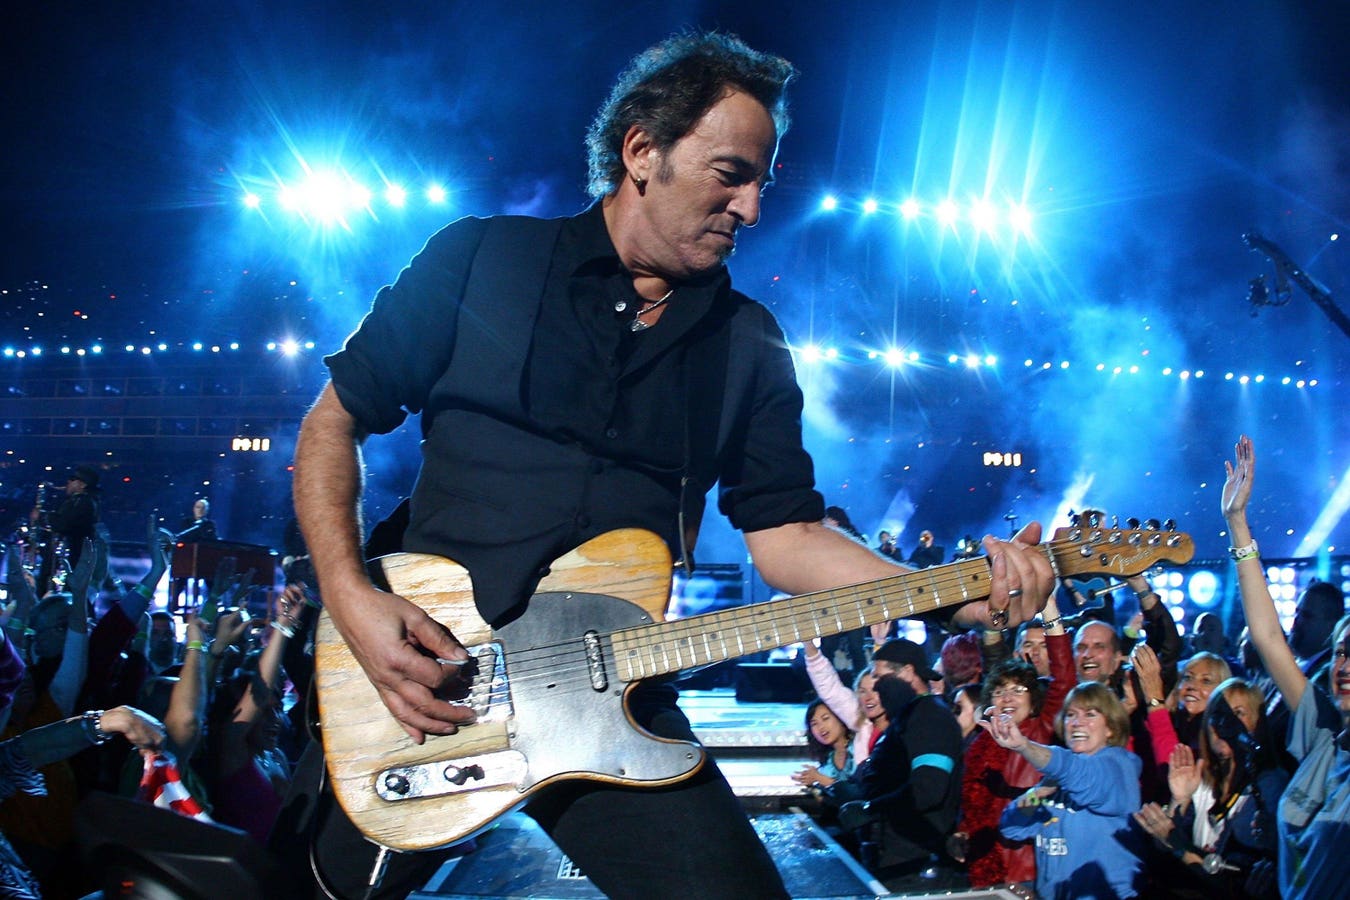 One Of Bruce Springsteen’s Earliest Singles Is A Top 40 Hit Again–For The First Time In Nearly 40 Years